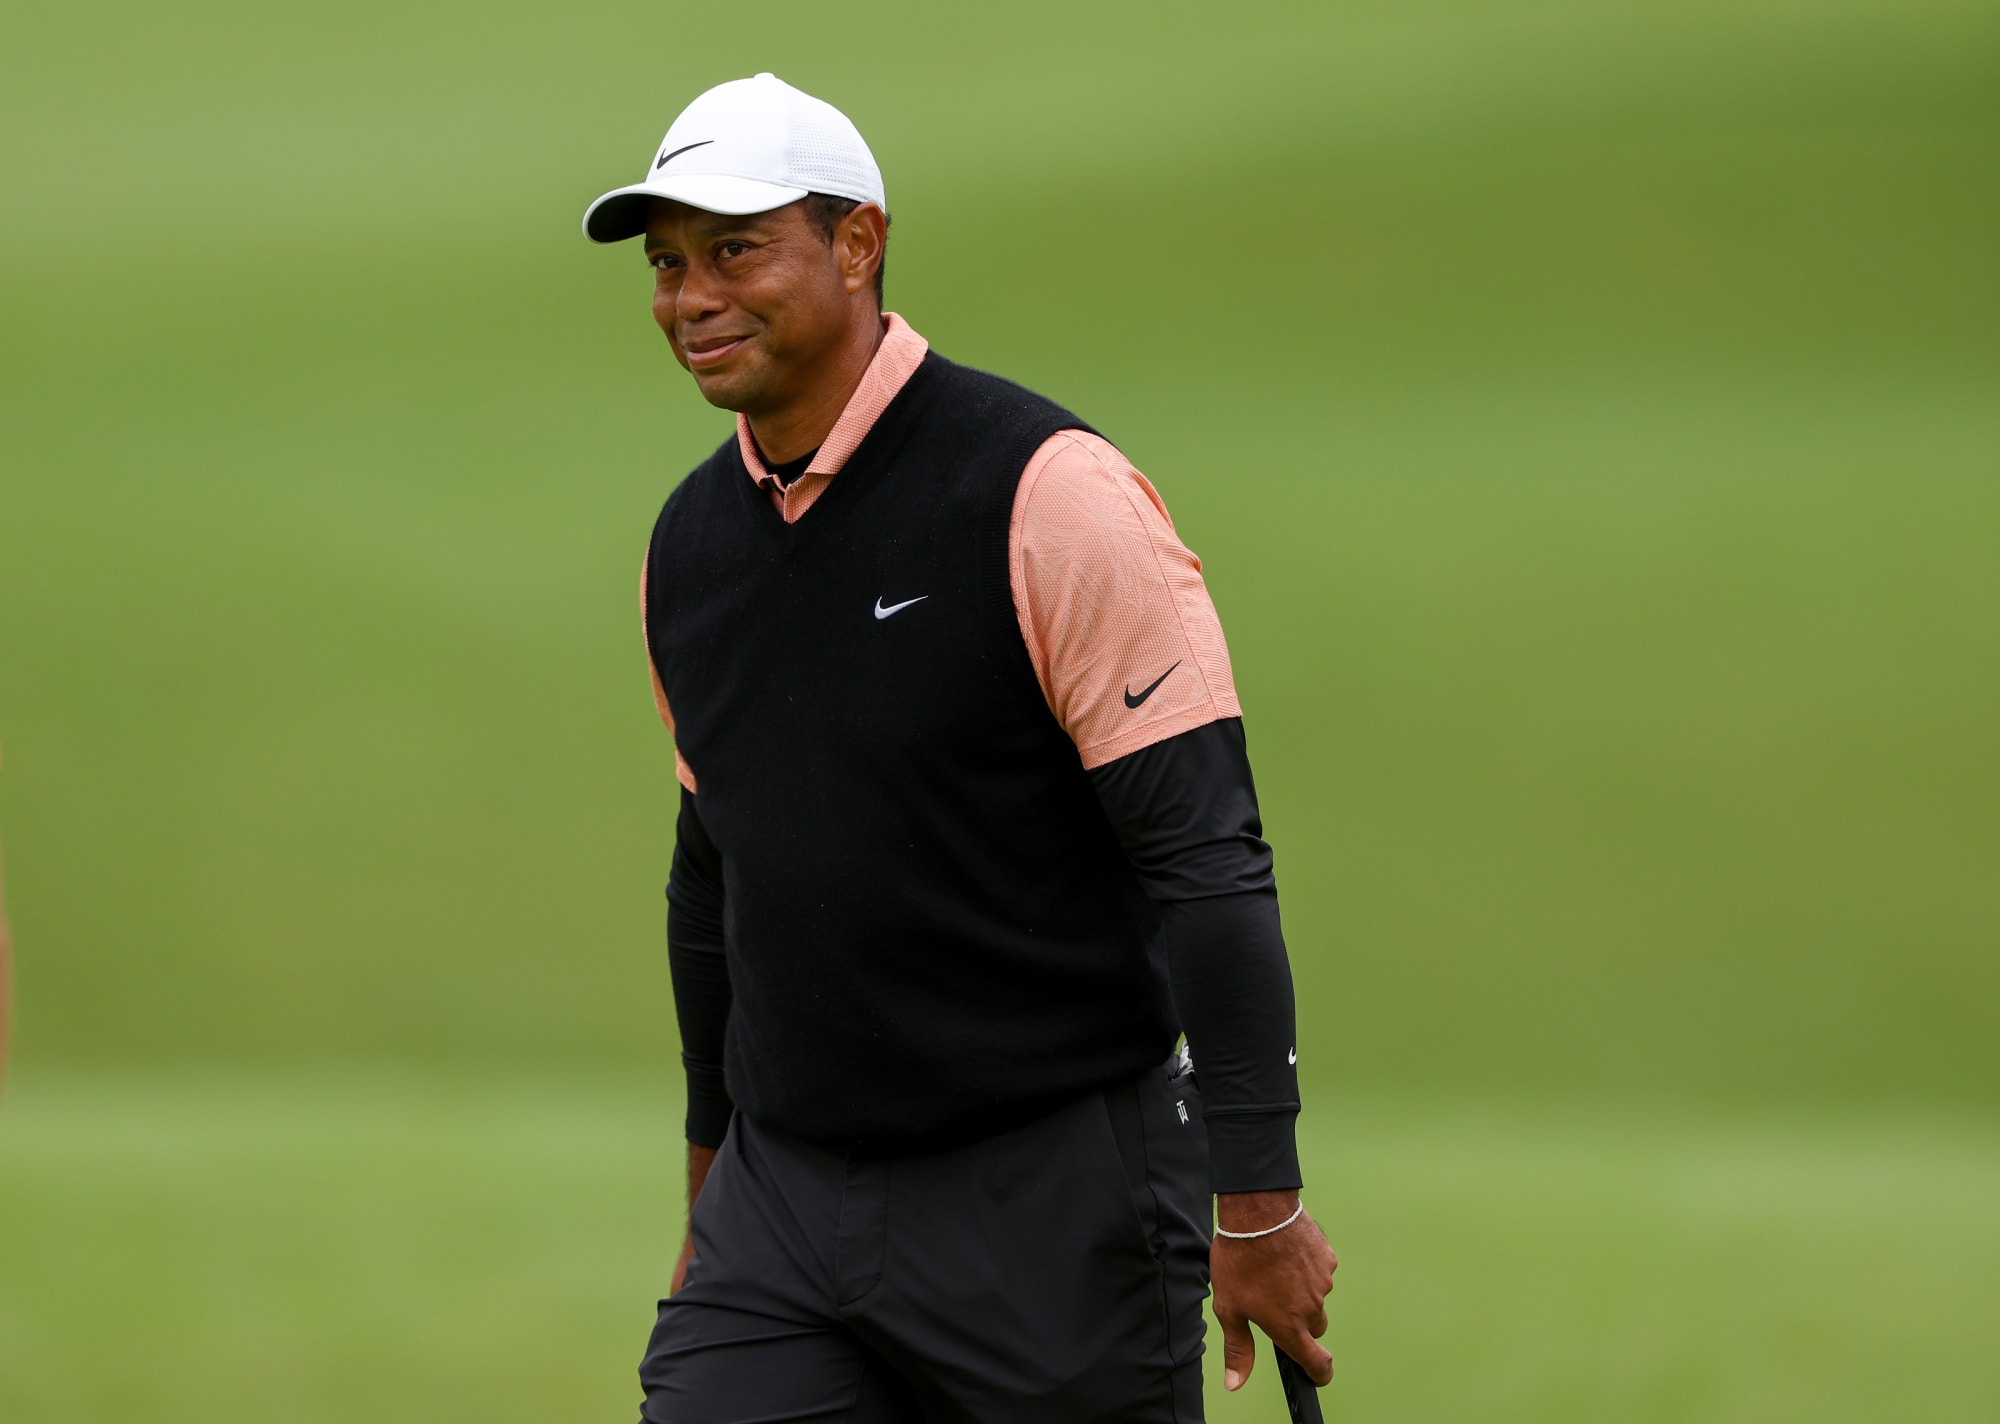 What’s Next for Tiger Woods After Withdrawing from PGA Championship